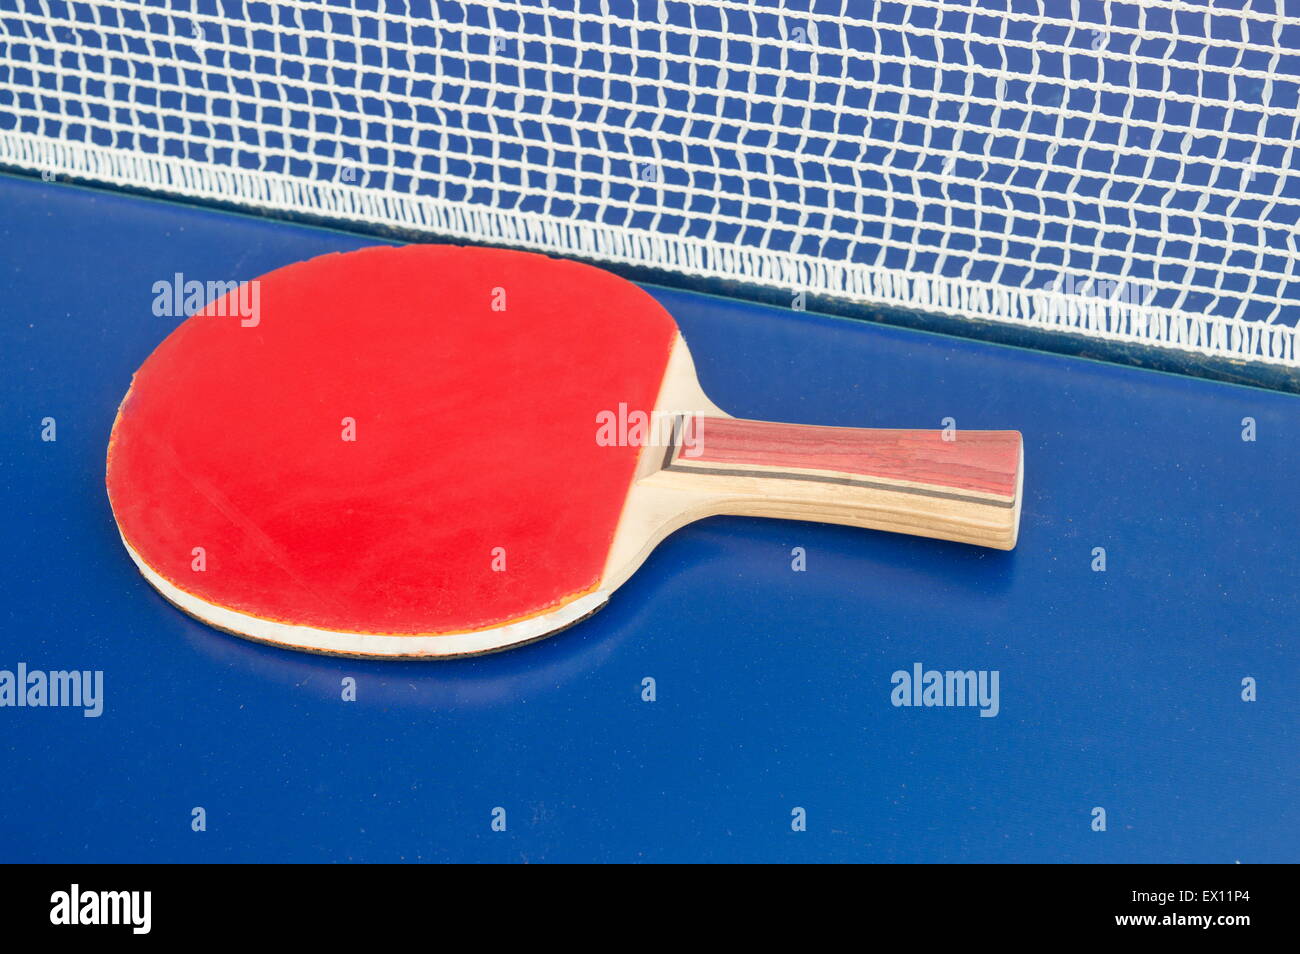 Table tennis racket and net on a blue table tennis table Stock Photo